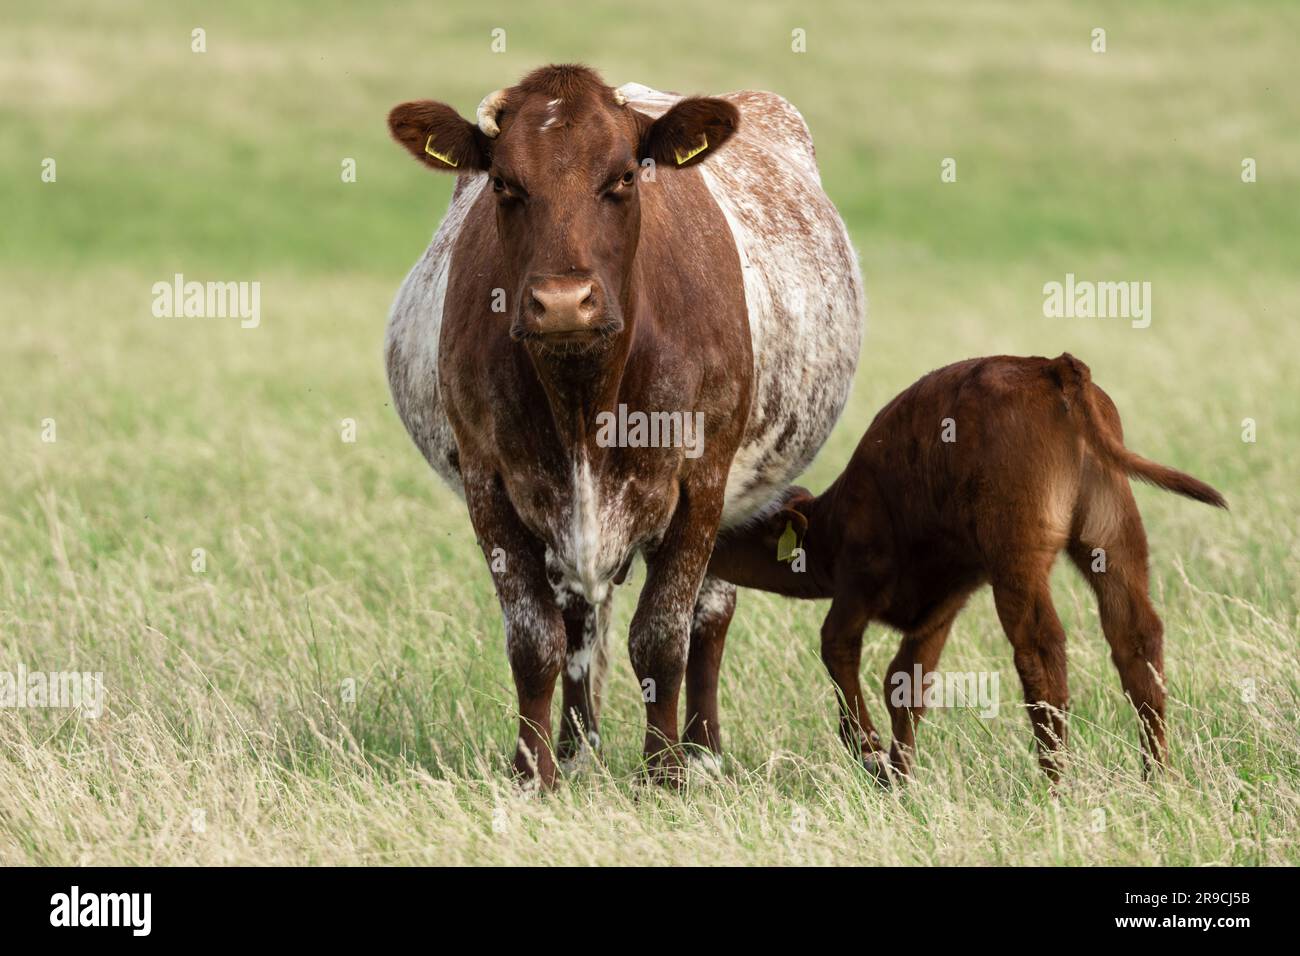 Close up of a  brown and white mother cow with her young calf suckling beneath her in Summertime.  Facing front.  Clean background.  Horizontal. Space Stock Photo